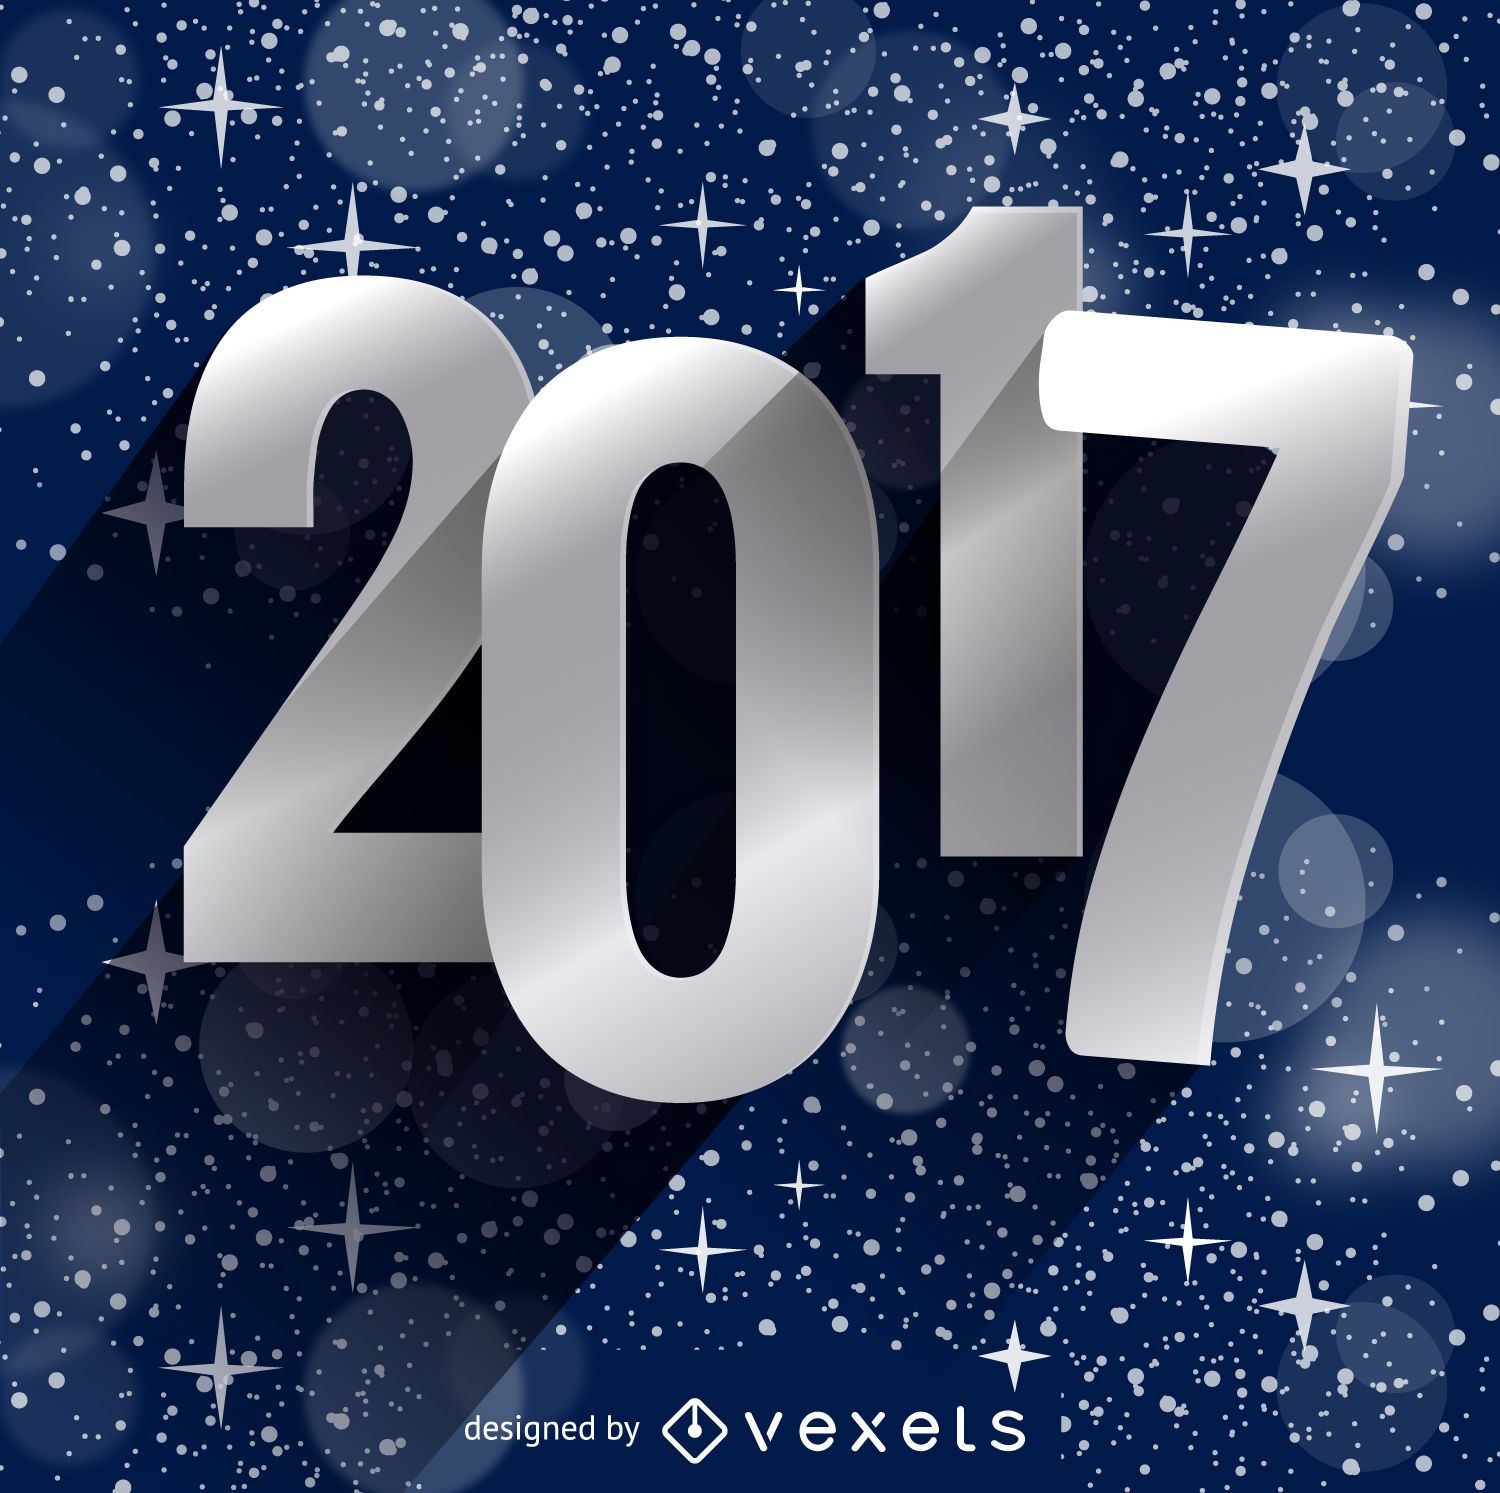 Silver 2017 greeting sign